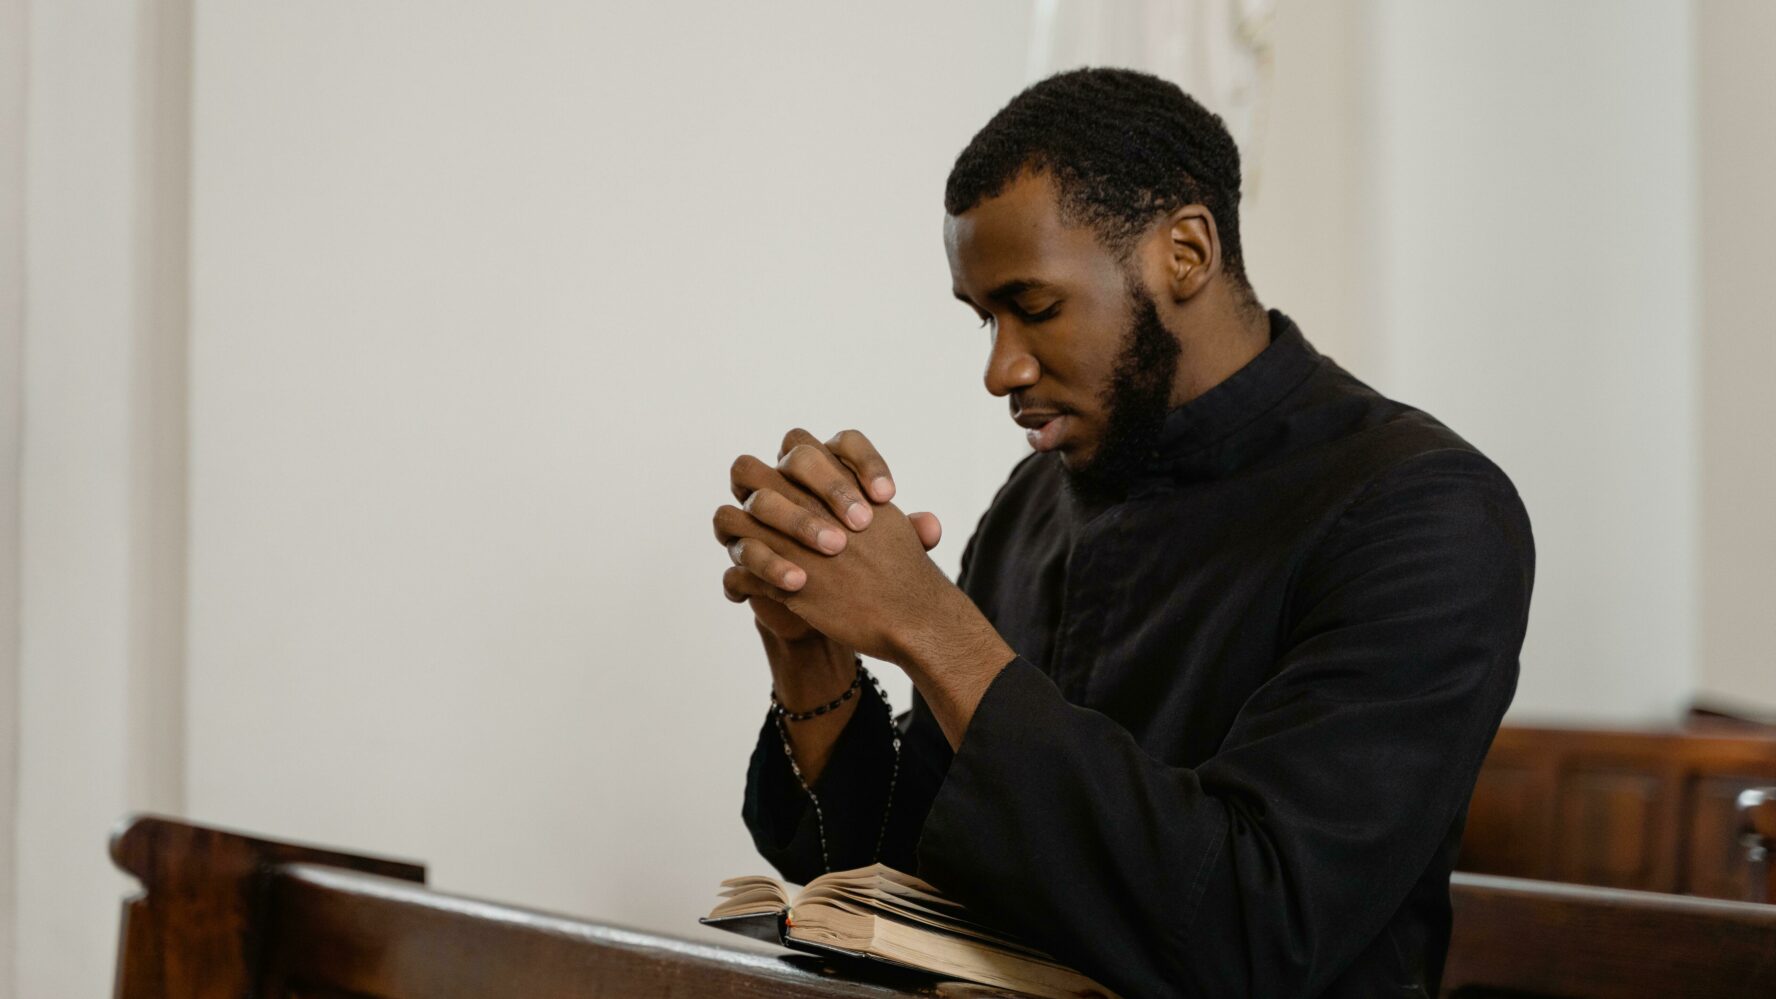 A young black man sat at a church pew, with his hands clasped together and eyes shut, praying. Photography by Mart Production.